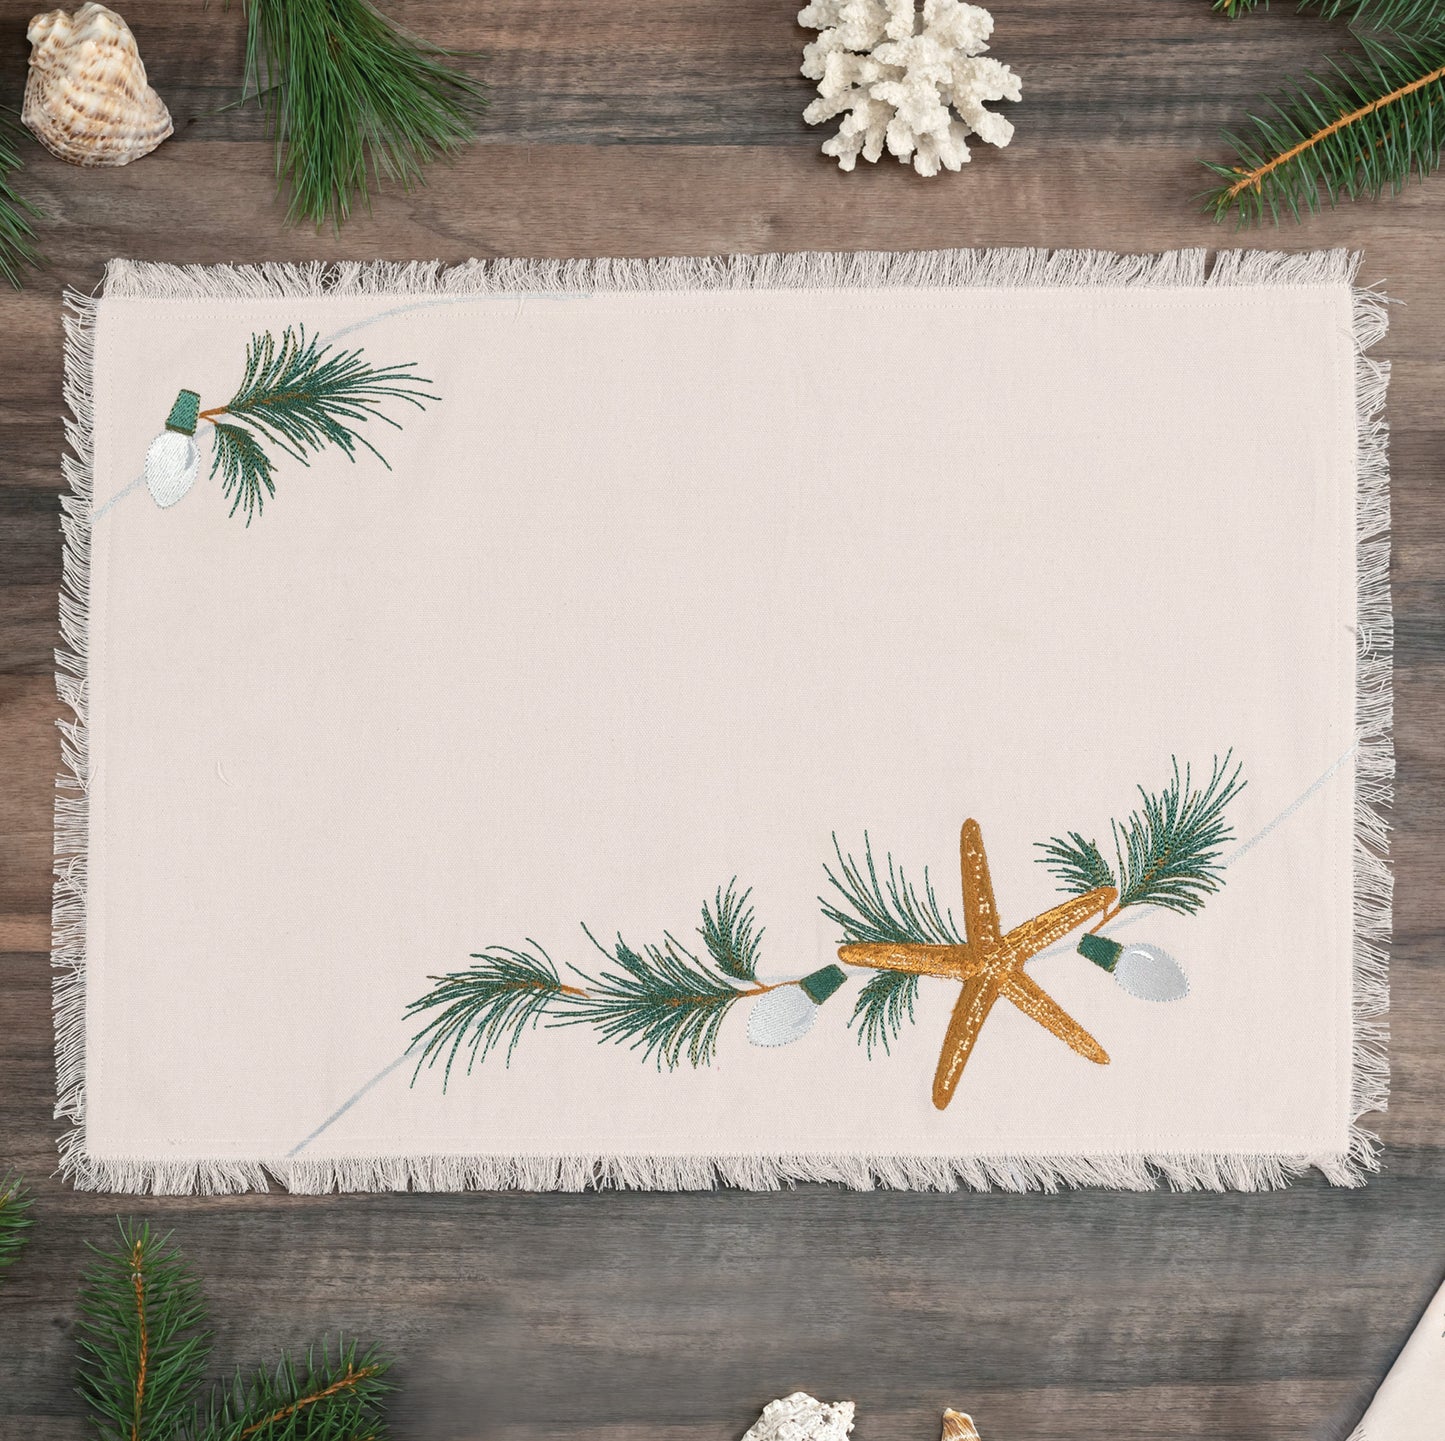 Natural cotton fringed placemat featuring an embroidered sea star, holiday lights, and evergreen needles laid on a wooden table.